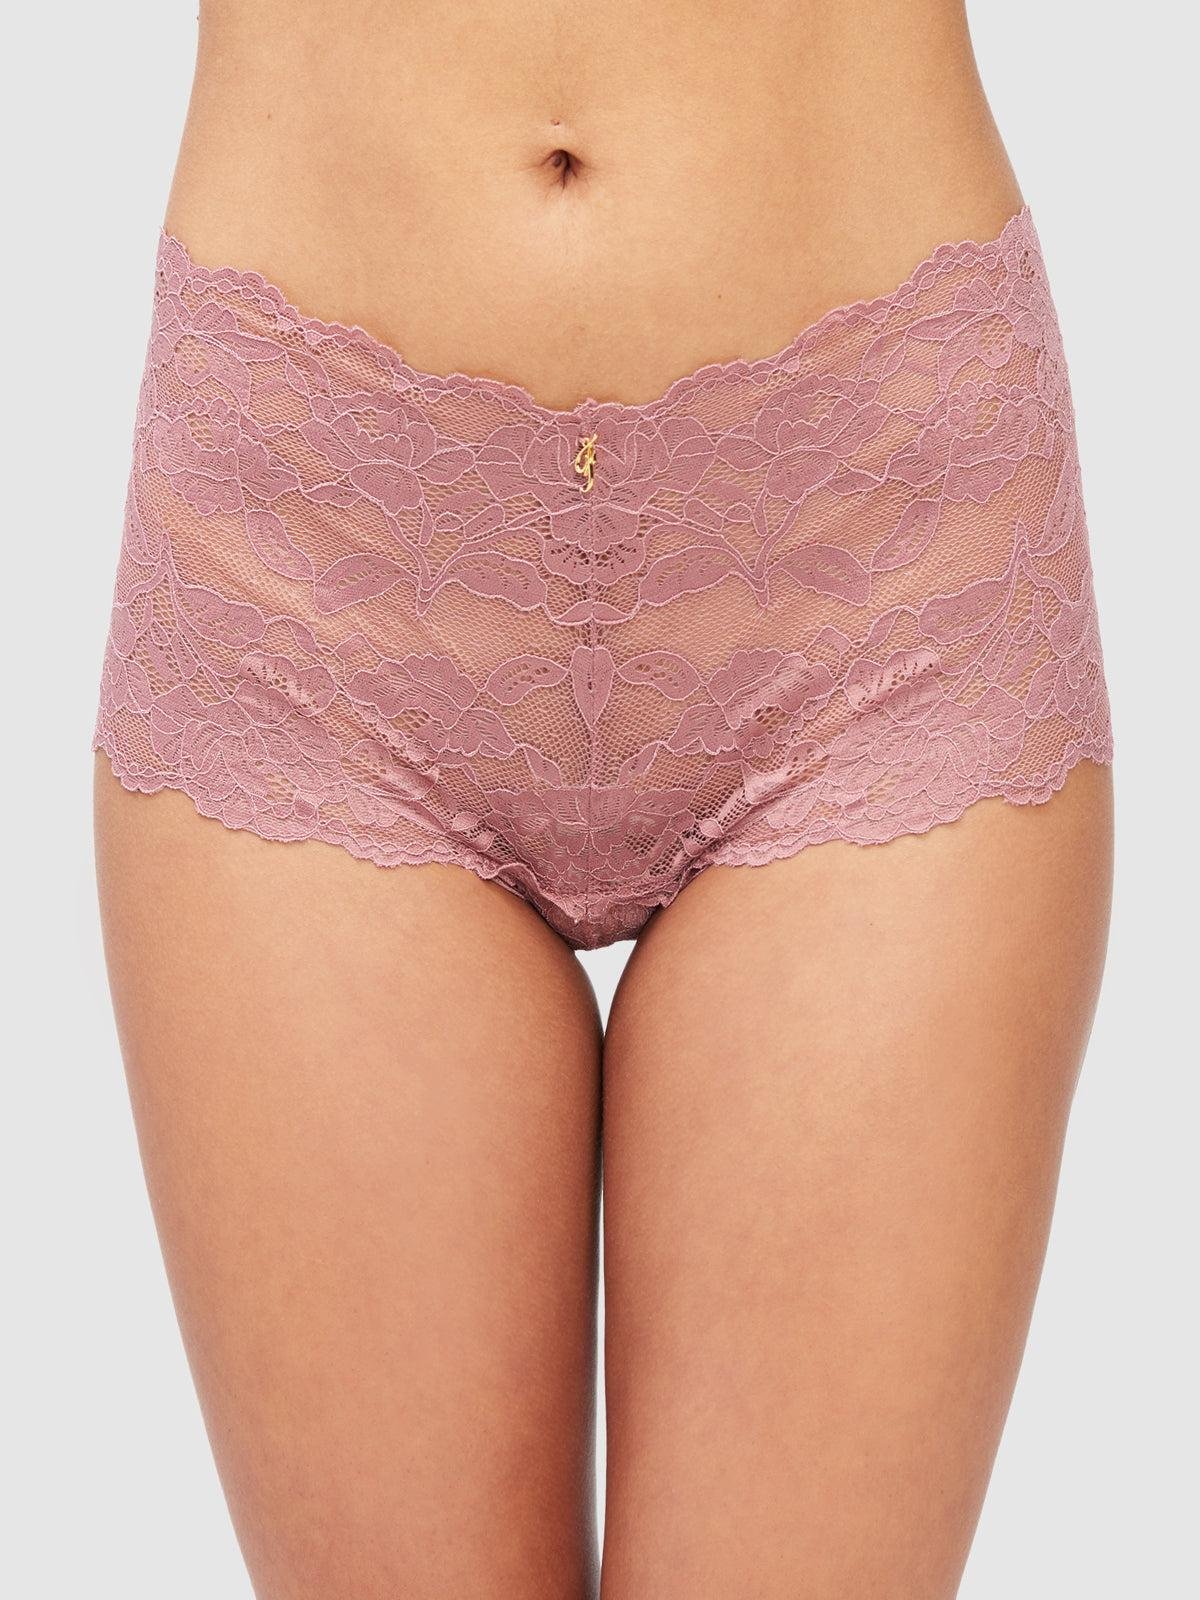 Mabel Crotchless Lace Up Back Cheeky in Sunstone by FREDERICK'S OF HOLLYWOOD